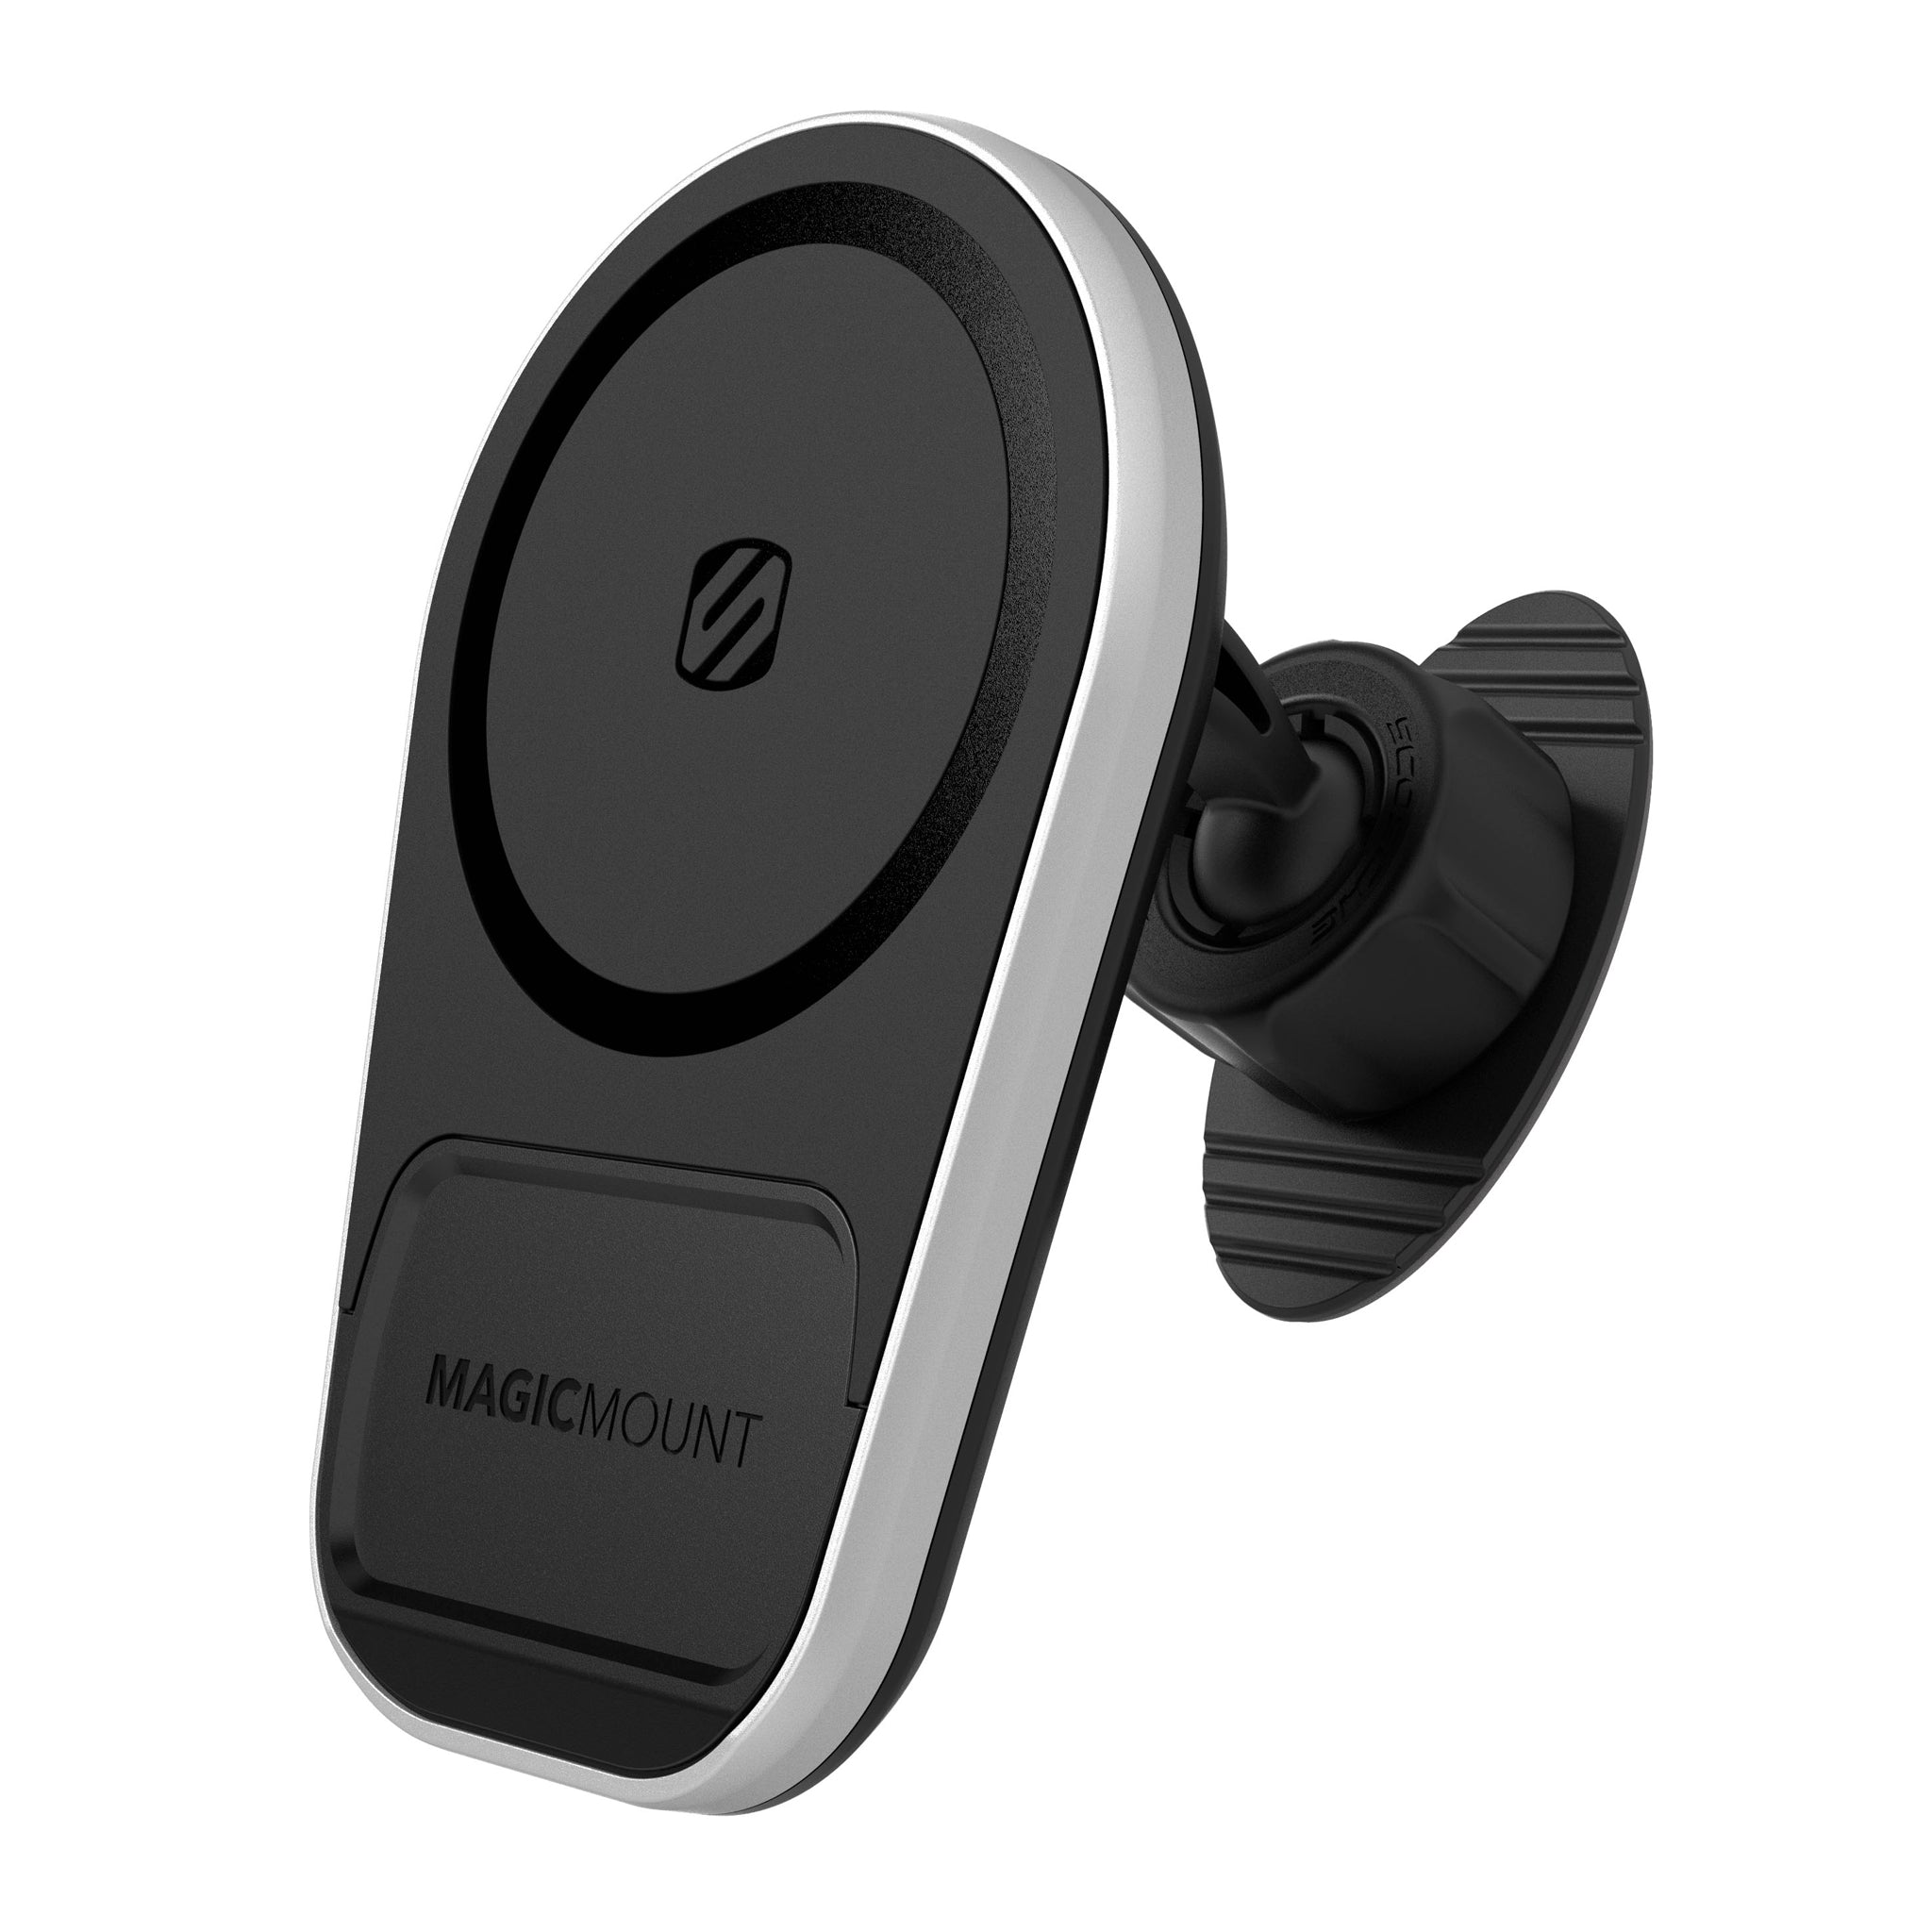 Scosche - Magicmount Charge5 Wireless Charging Dash / Vent Mount - Black And Silver